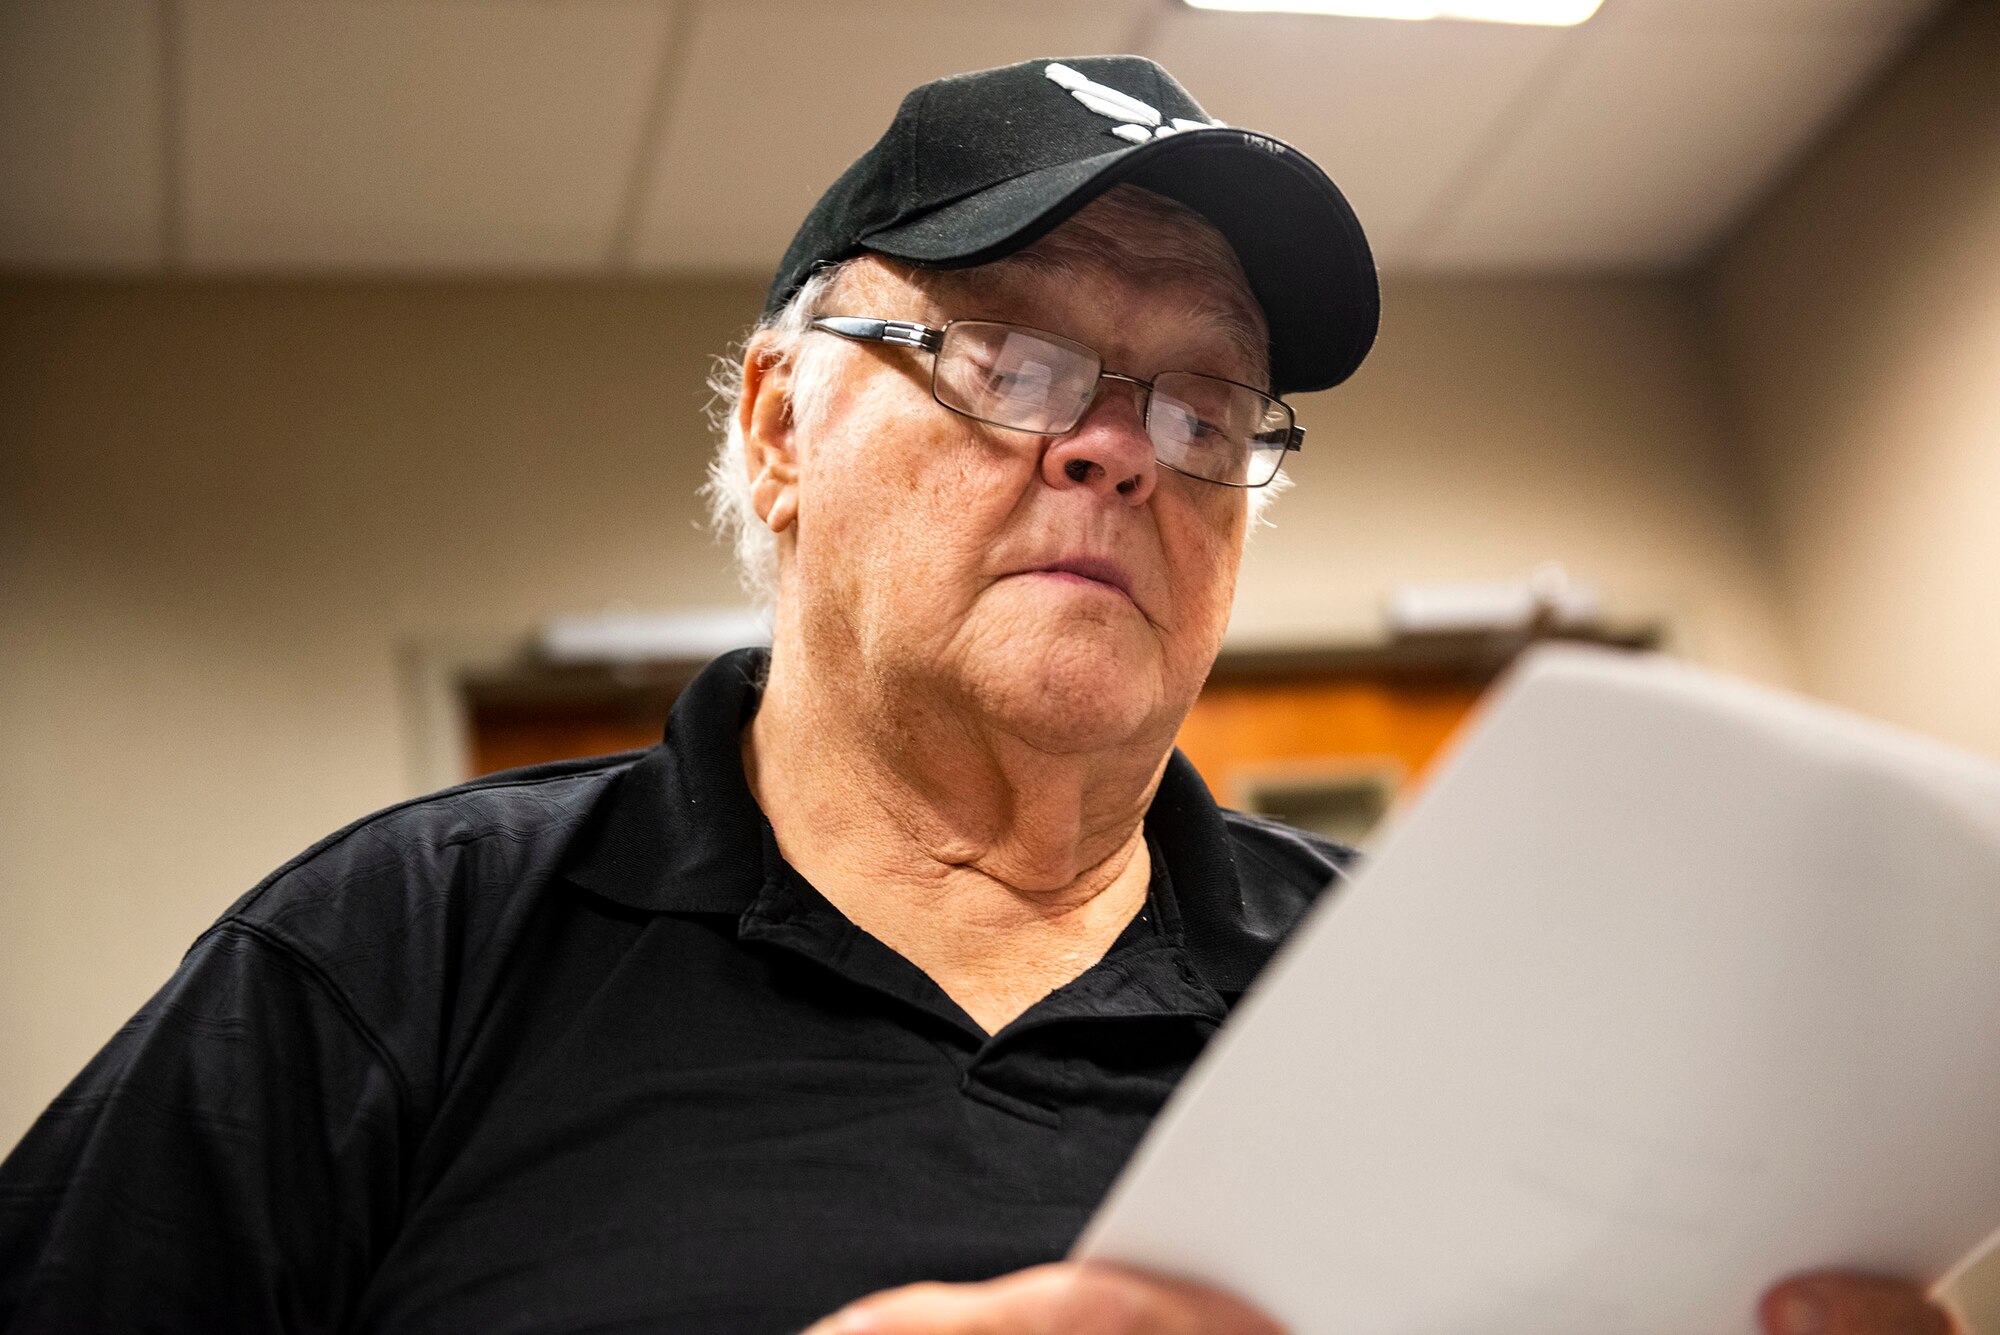 Larry Sheffield, retiree, examines his will Oct. 8, 2019, at Moody Air Force Base, Ga. The judge advocate office regularly aids retirees and military members with wills on Tuesdays. This free legal assistance provides personal and financial relief for customers and enables Airman readiness. (U.S. Air Force photo by Senior Airman Erick Requadt)